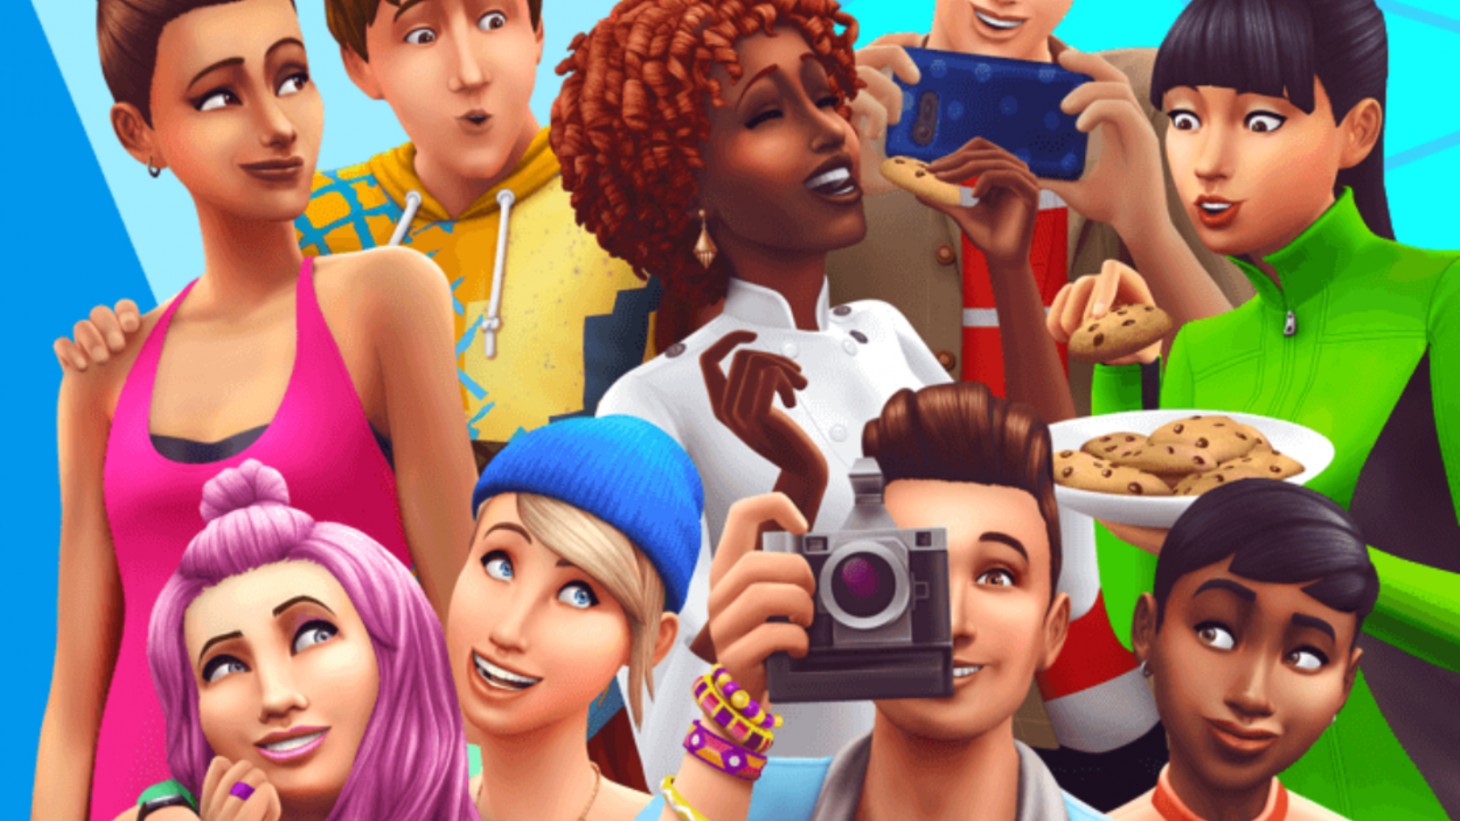 sims 4 game play now for free